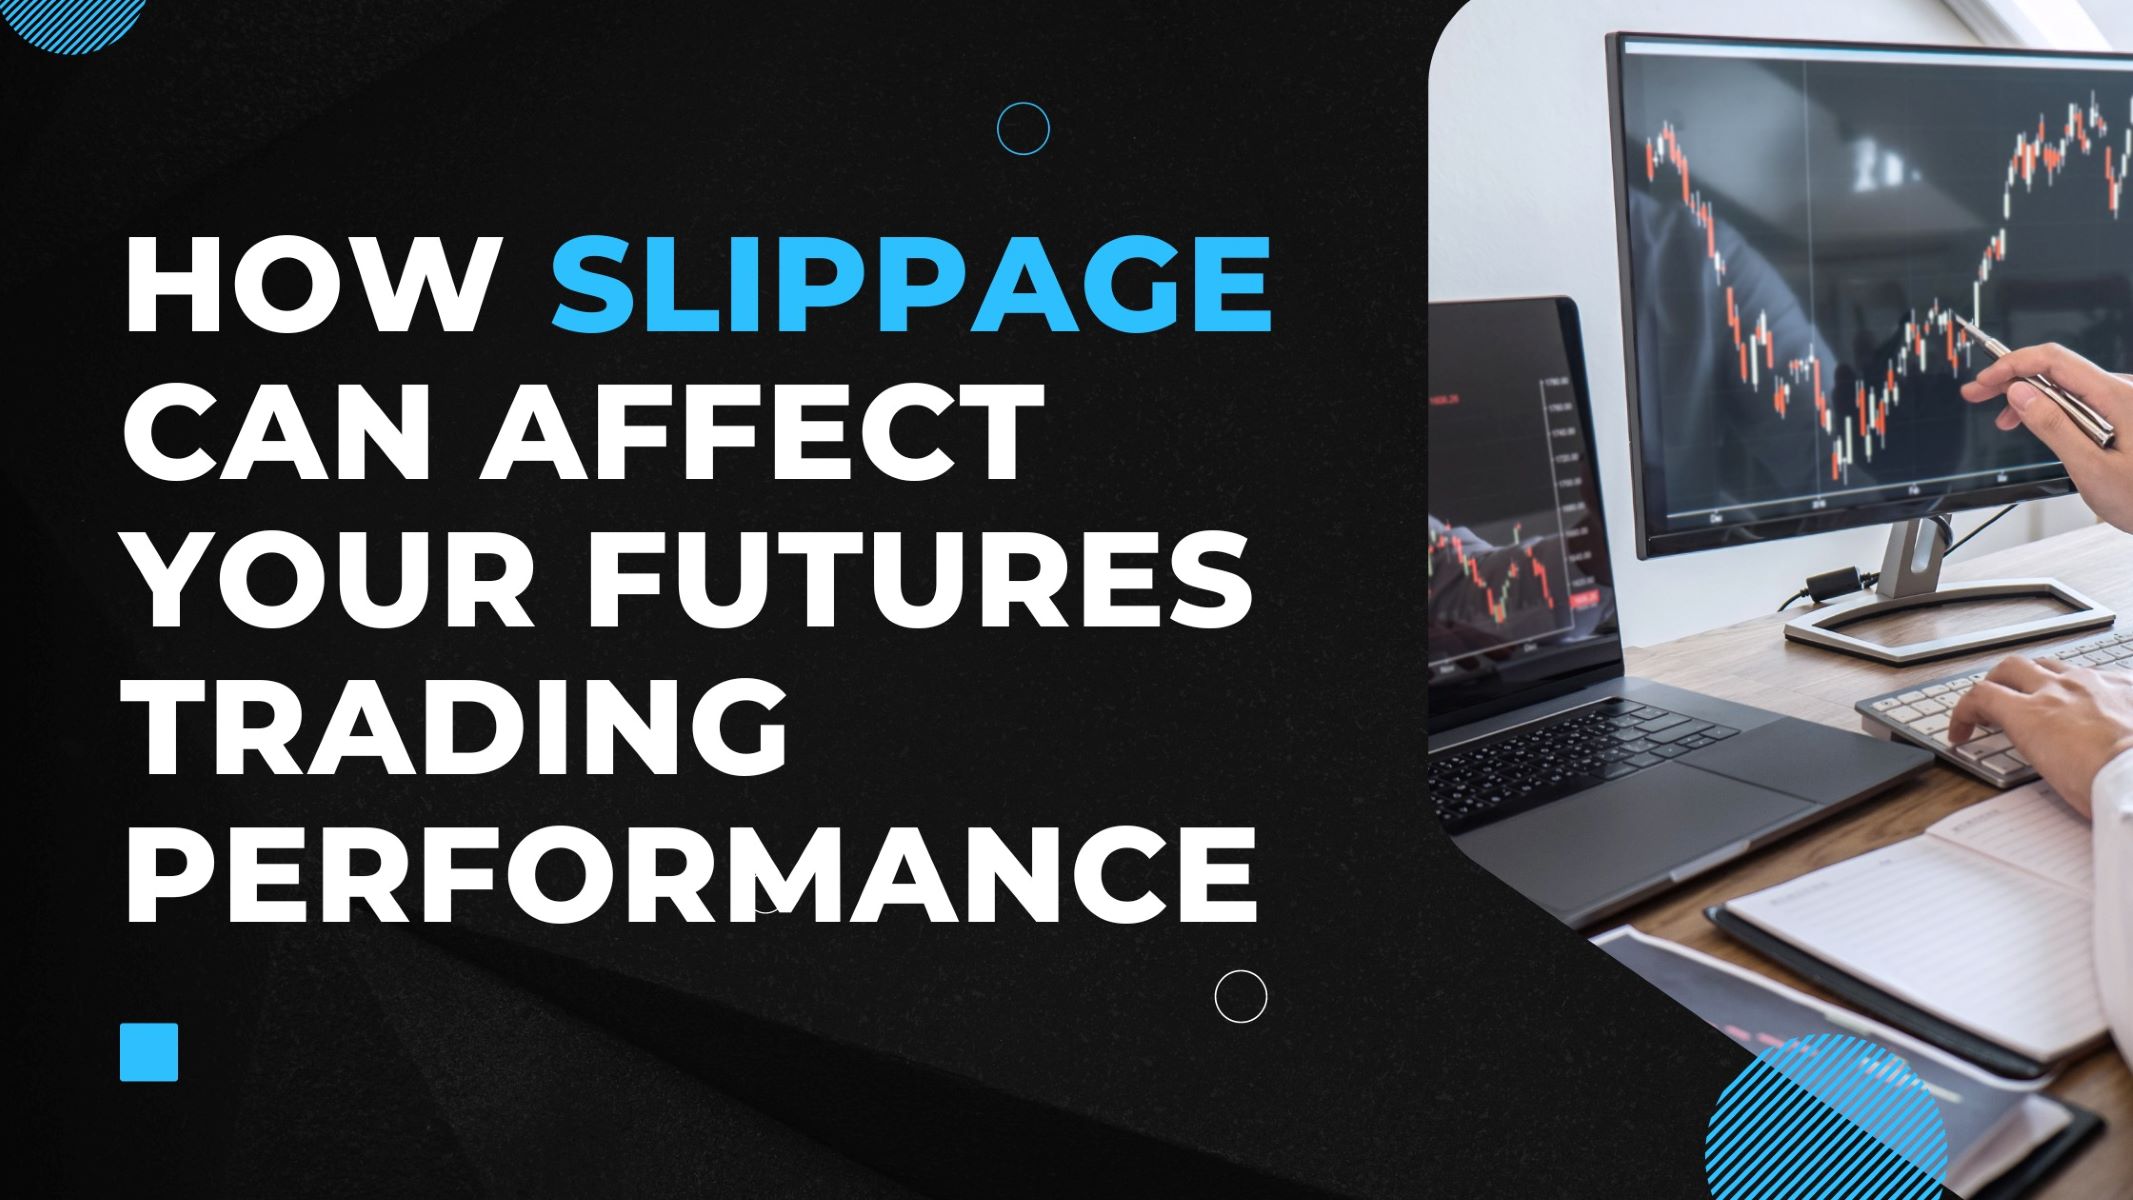 How Many Futures Contracts Can You Trade Before Experiencing Slippage?